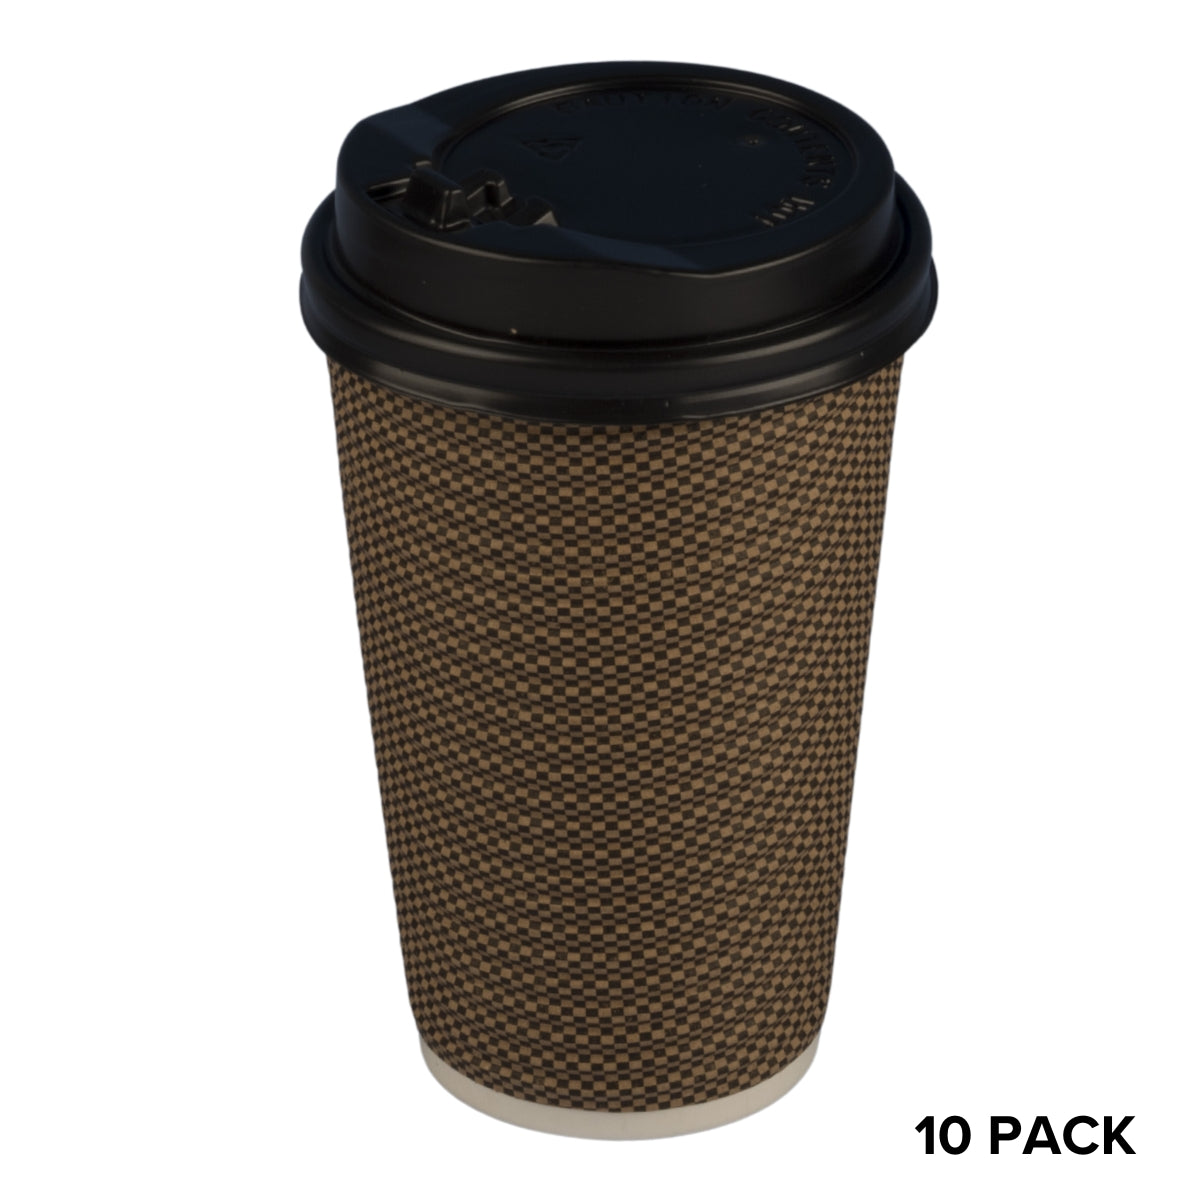 Choice Dining - 12oz Insulated Paper Coffee Cups with Lids - 10 Pack with a textured brown sleeve and black lid, labeled as a 10-pack.